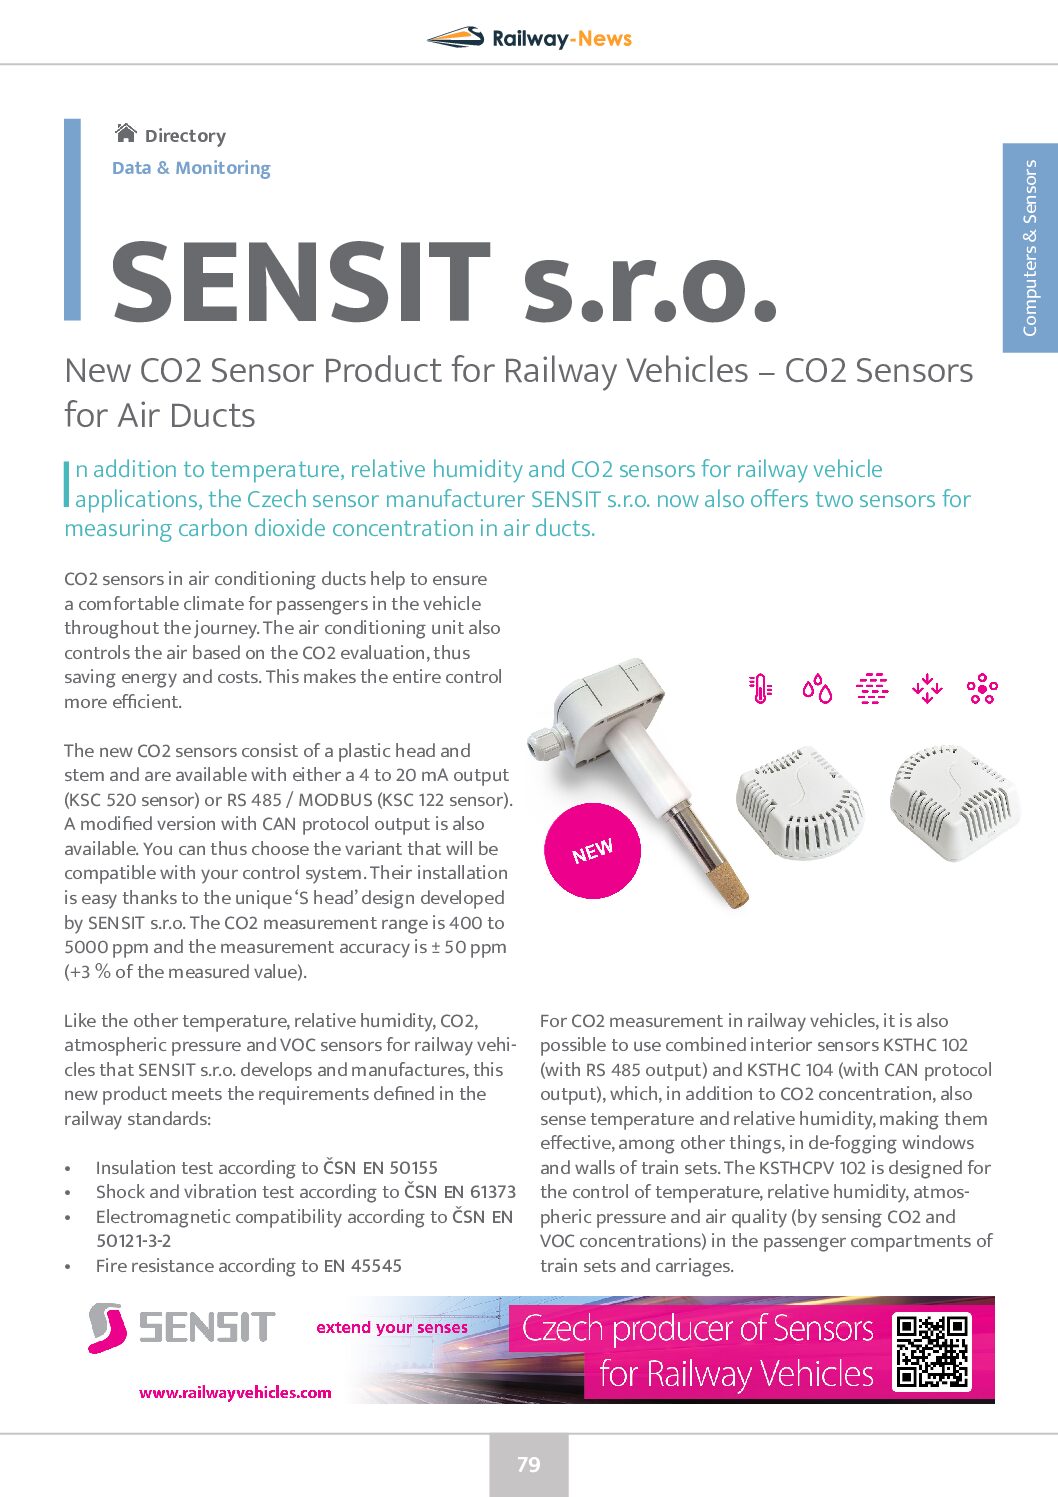 New CO2 Sensor Product for Railway Vehicle Air Ducts